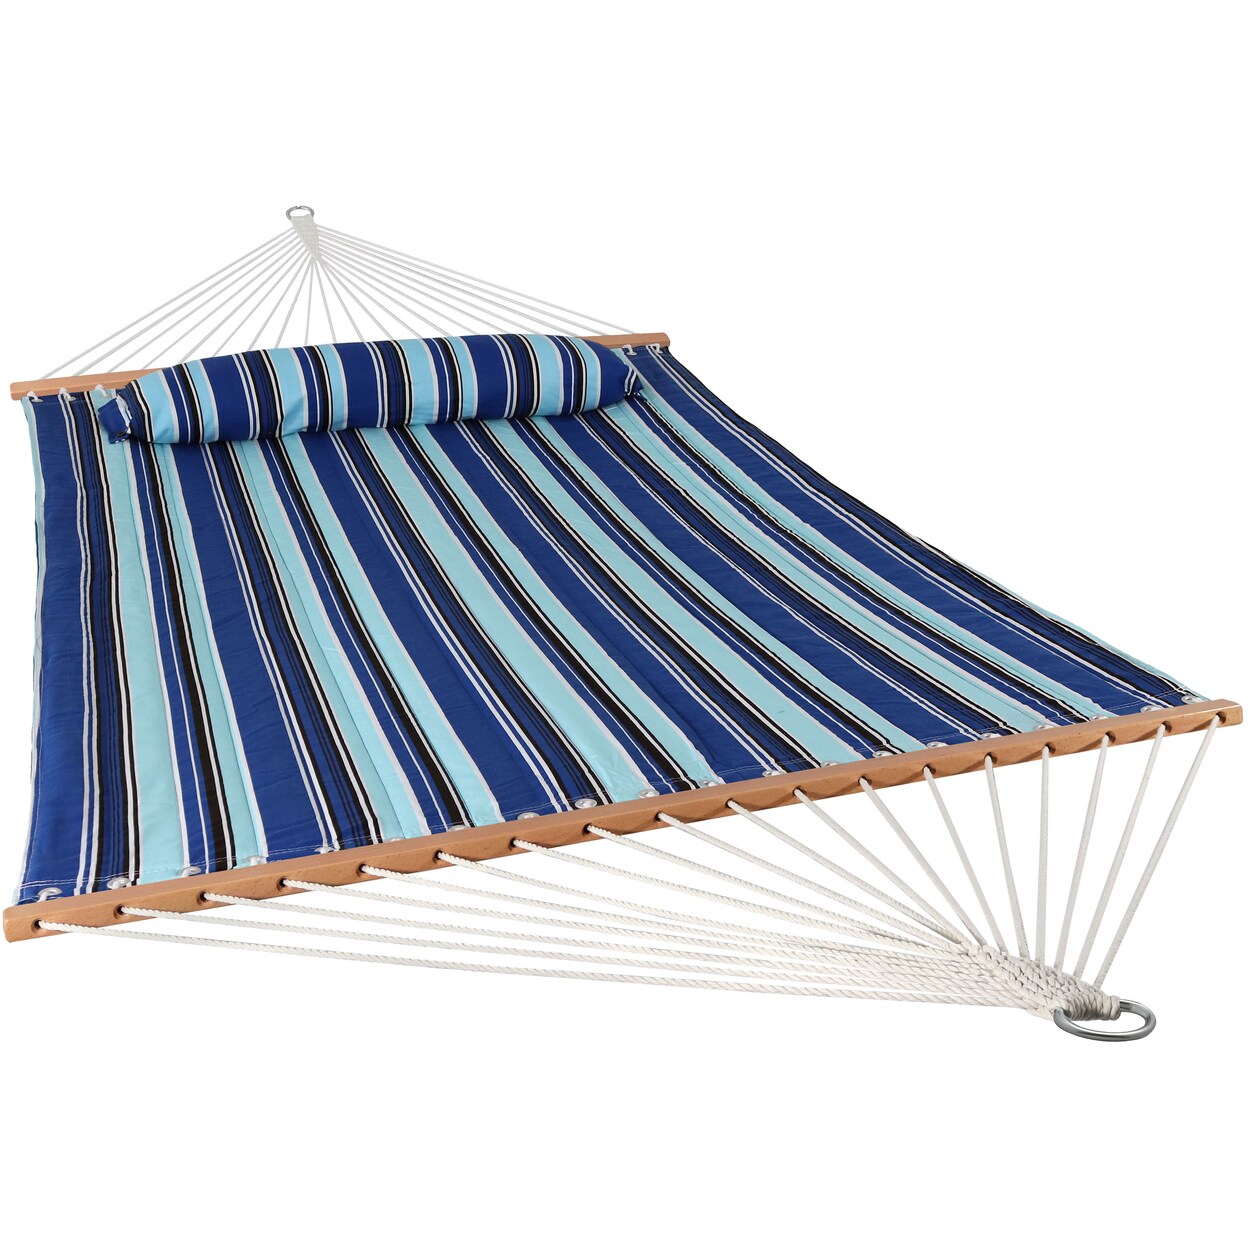 Sunnydaze   Large Quilted Fabric Hammock with Spreader Bar and Pillow - Beach